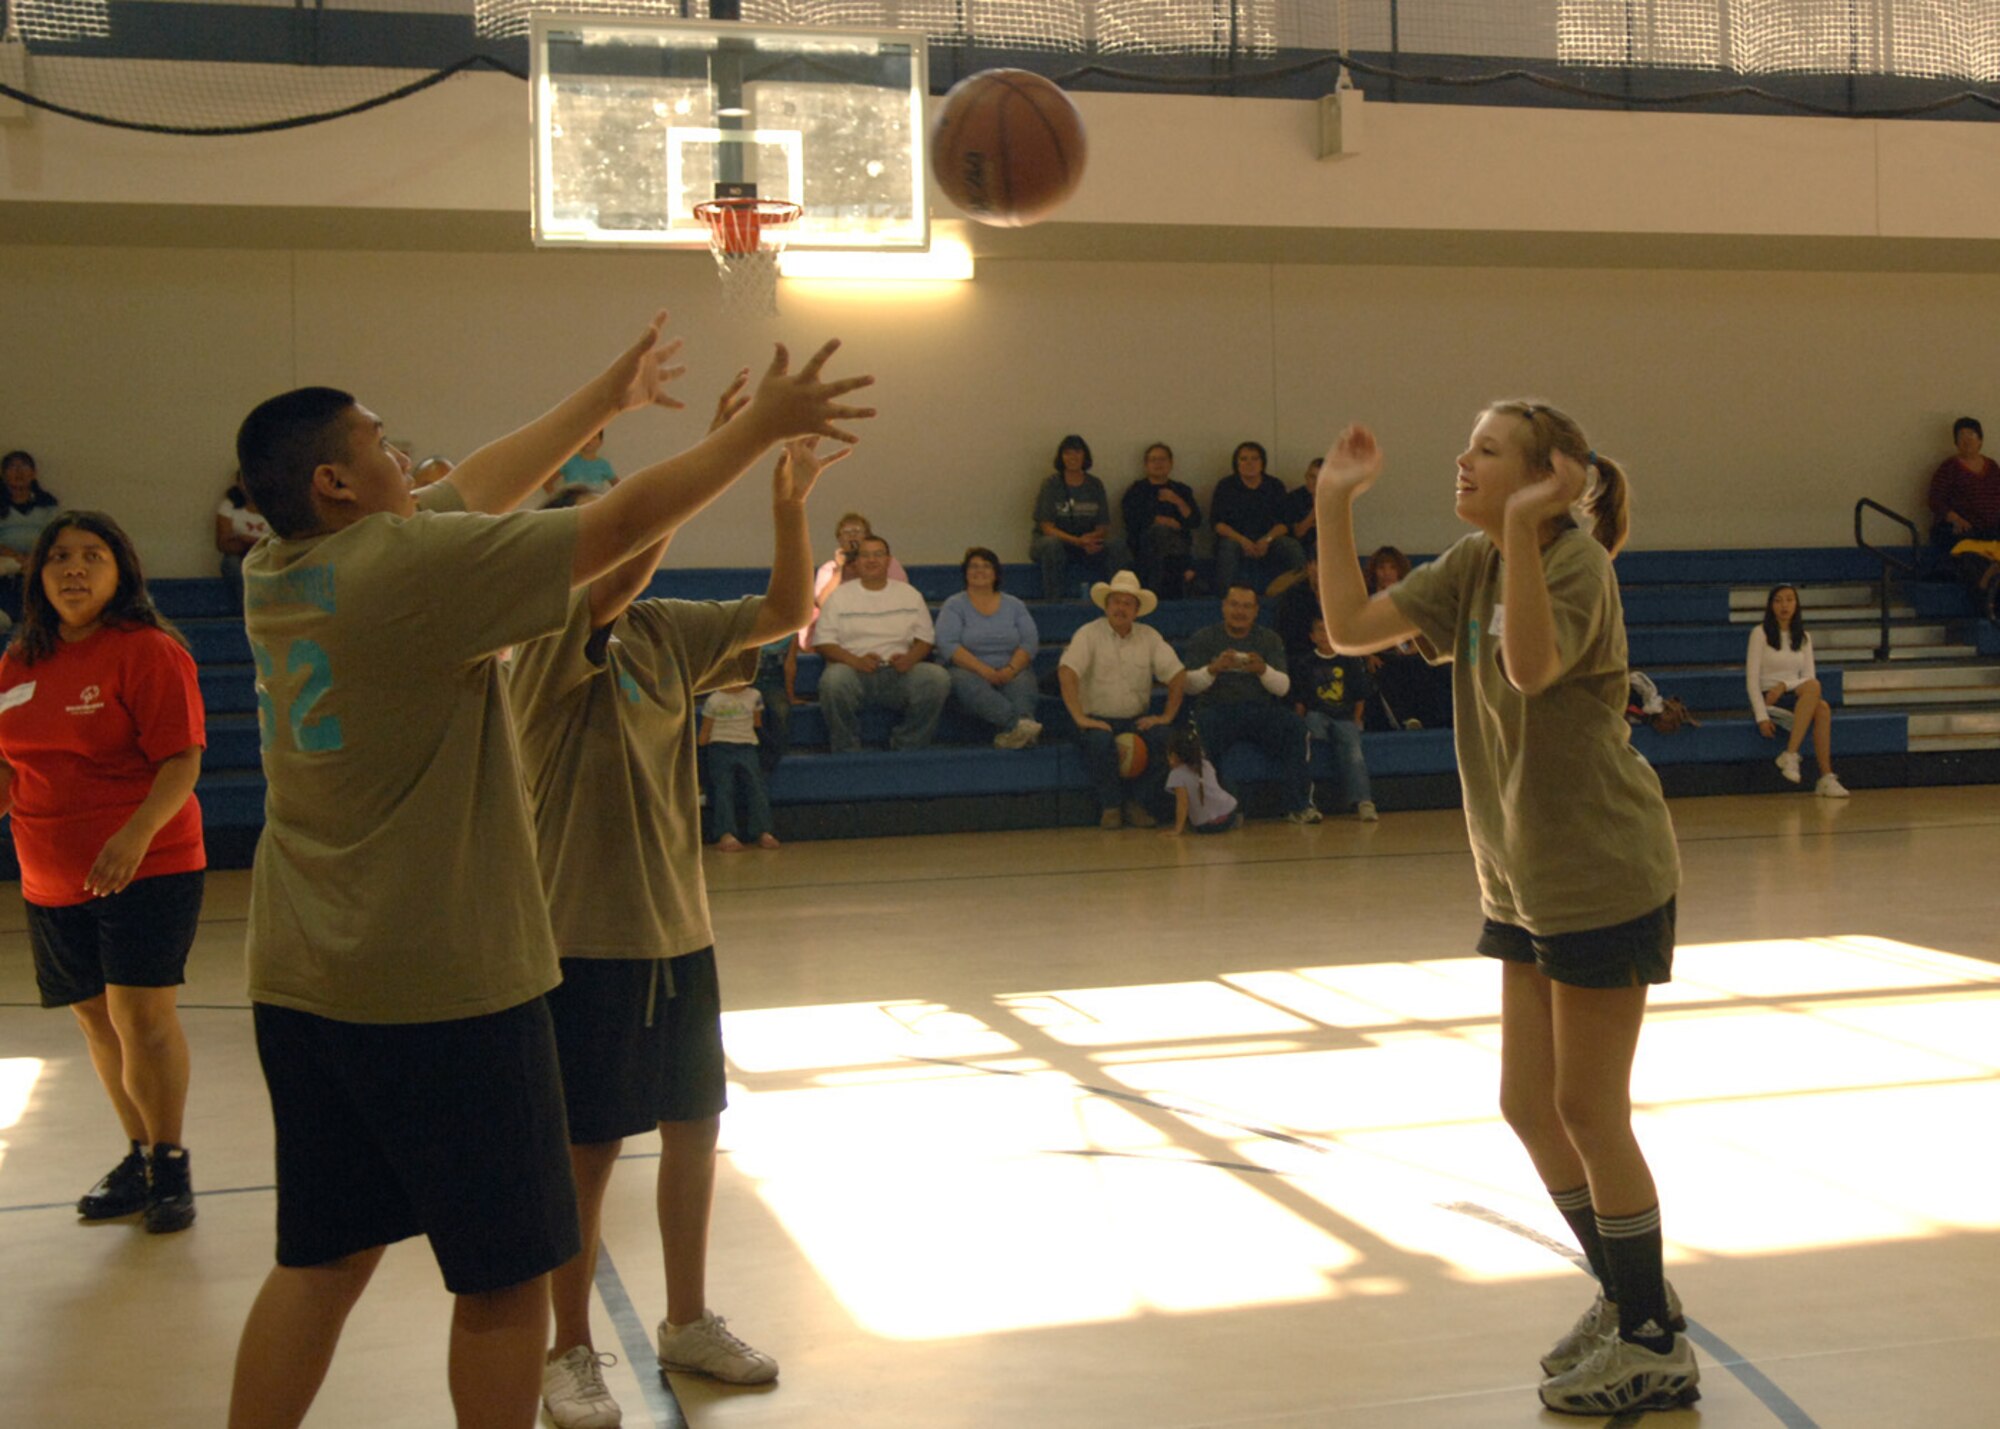 Sacia, basketball player from Zia Middle School, passes the ball over to her team-mates for a winnging shot during the Special Olympics basketball game October 24. Members from Holloman and the Las Cruces community came out to Holloman Air Force Base, N.M., to support the athletes. (U.S. Air Force photo/Airman 1st Class Veronica Salgado)